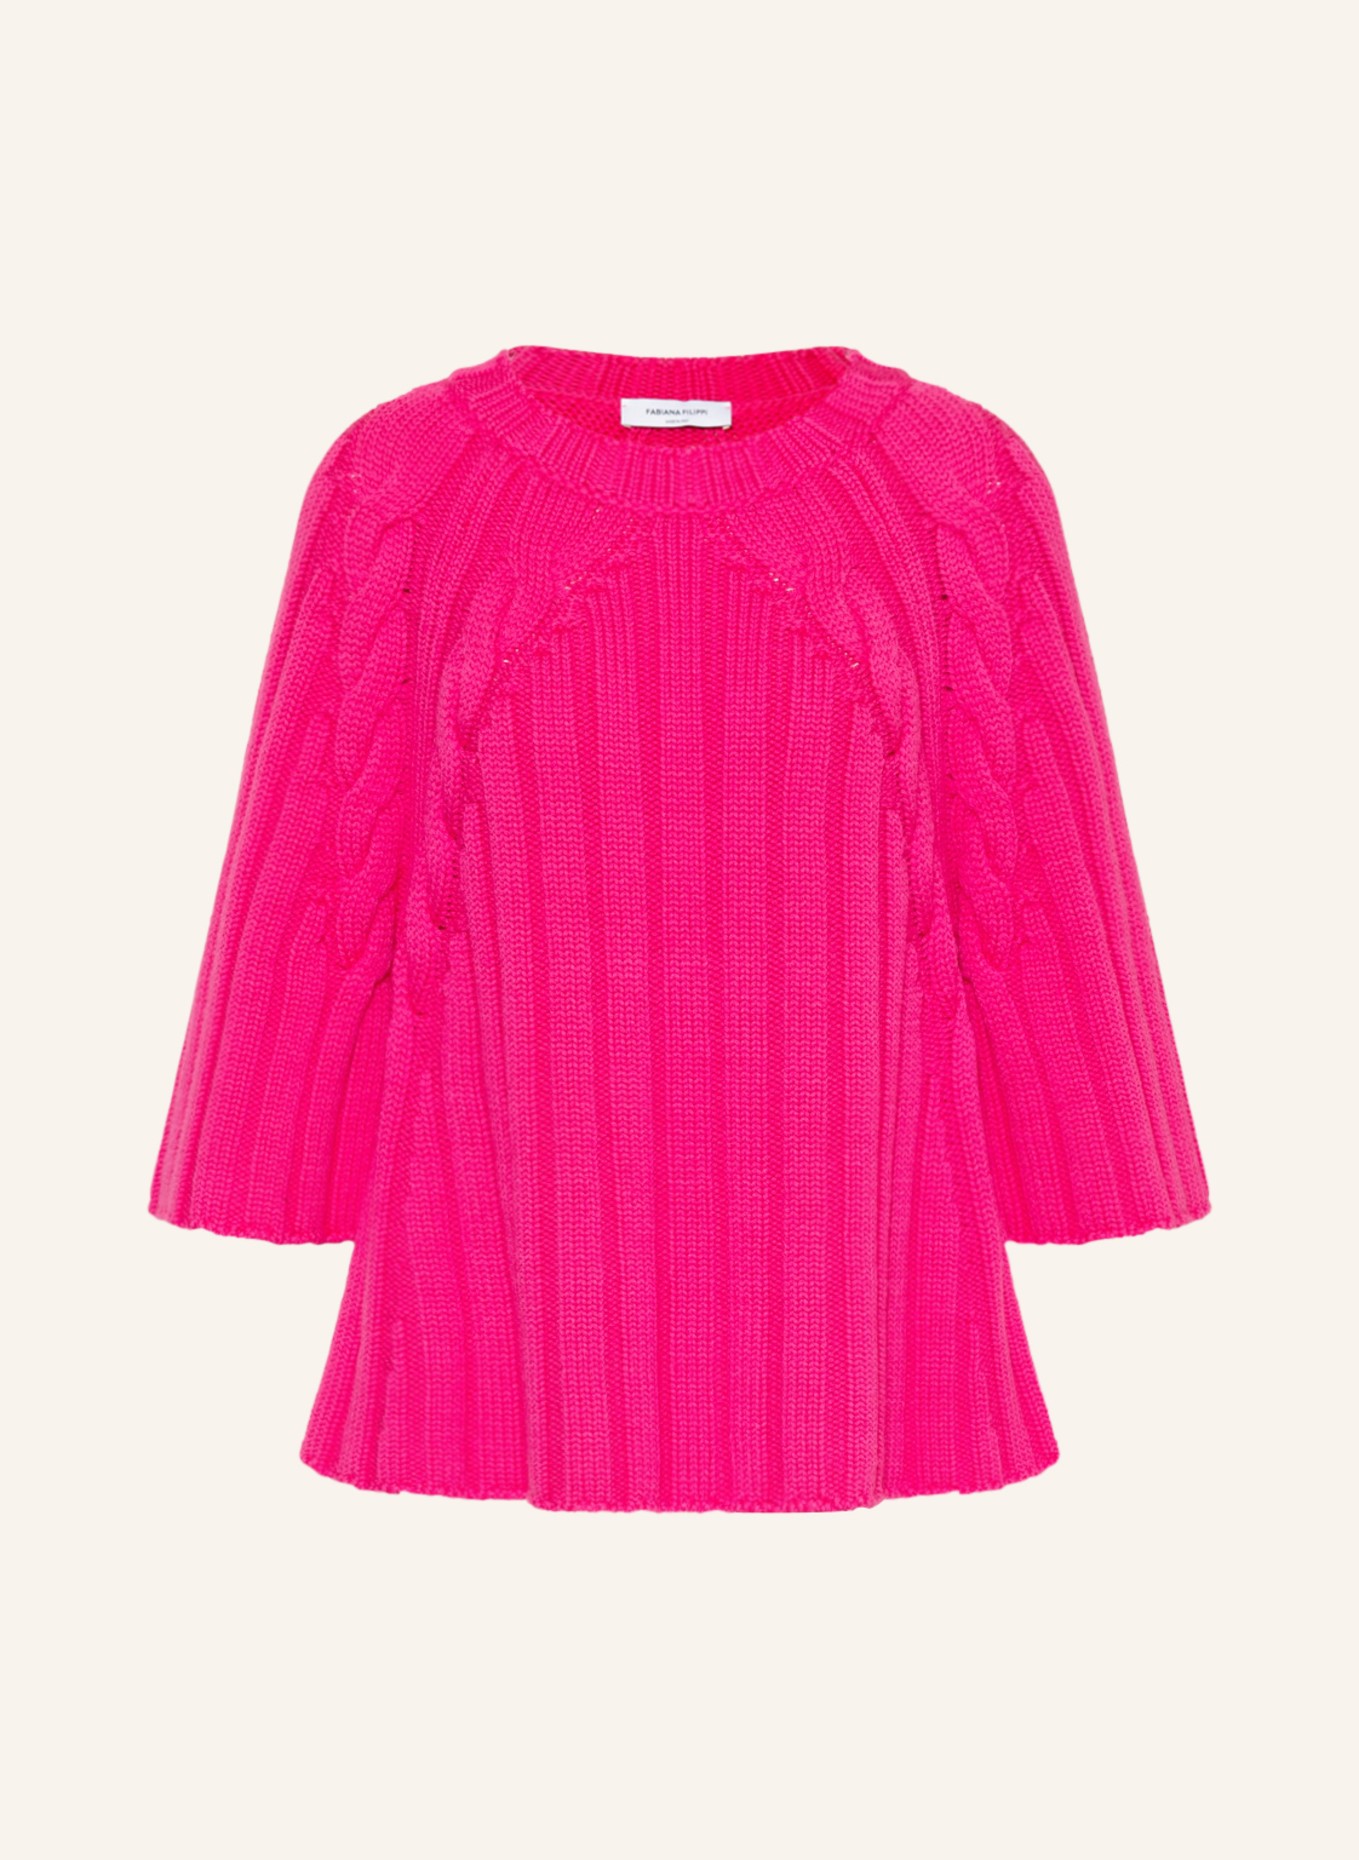 FABIANA FILIPPI Sweater made of merino wool with 3/4 sleeves, Color: PINK (Image 1)